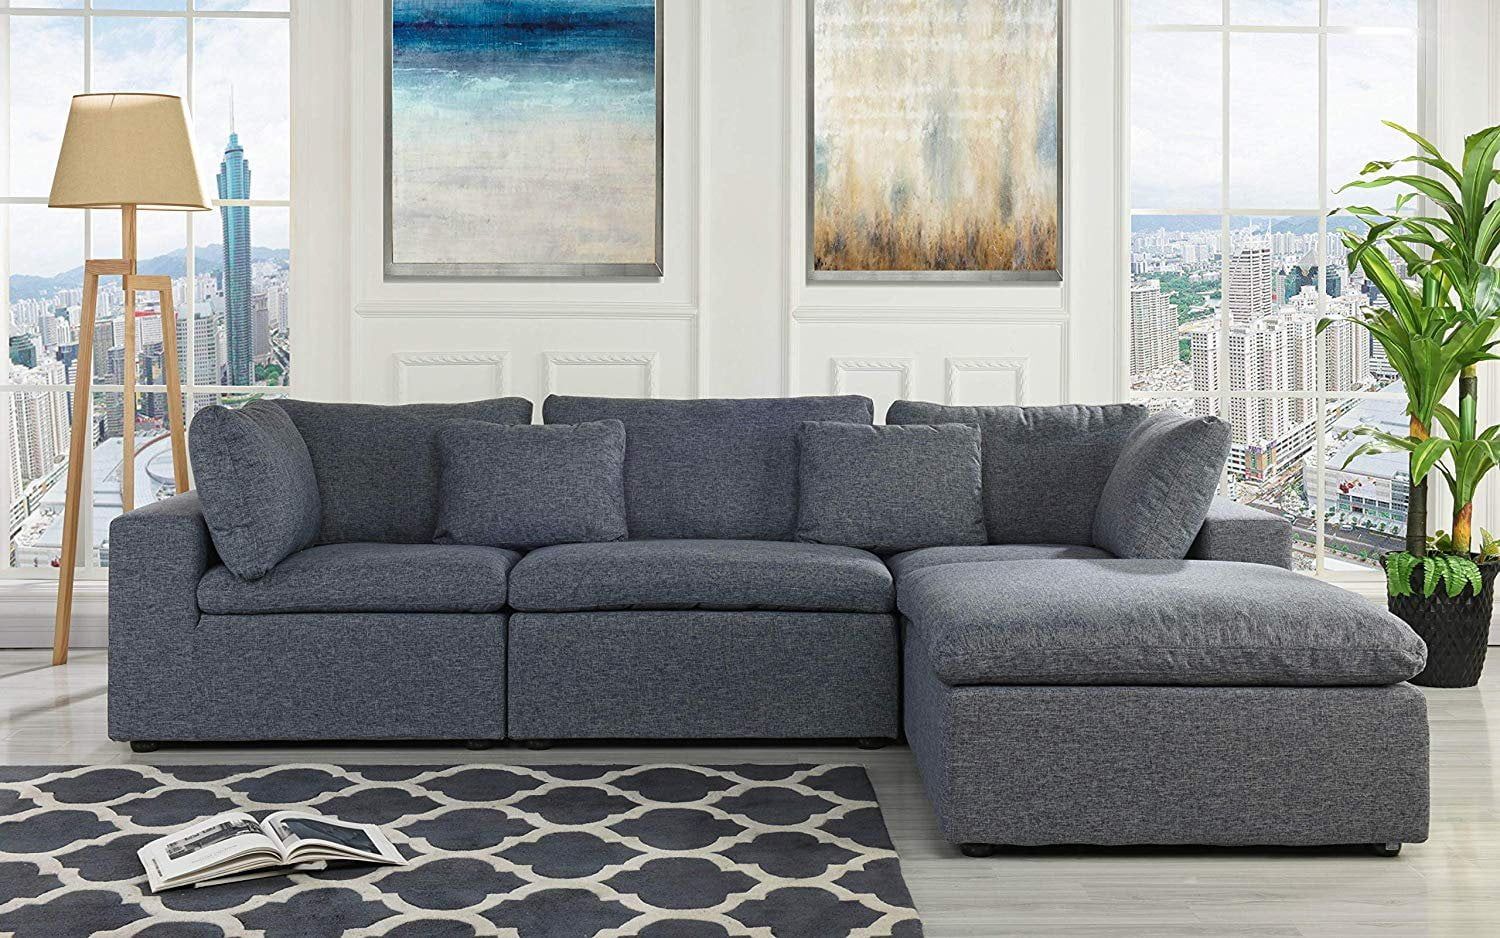 Classic Large Linen Fabric Sectional Sofa, L Shape Couch With Wide For Gray Linen Sofas (Gallery 3 of 20)